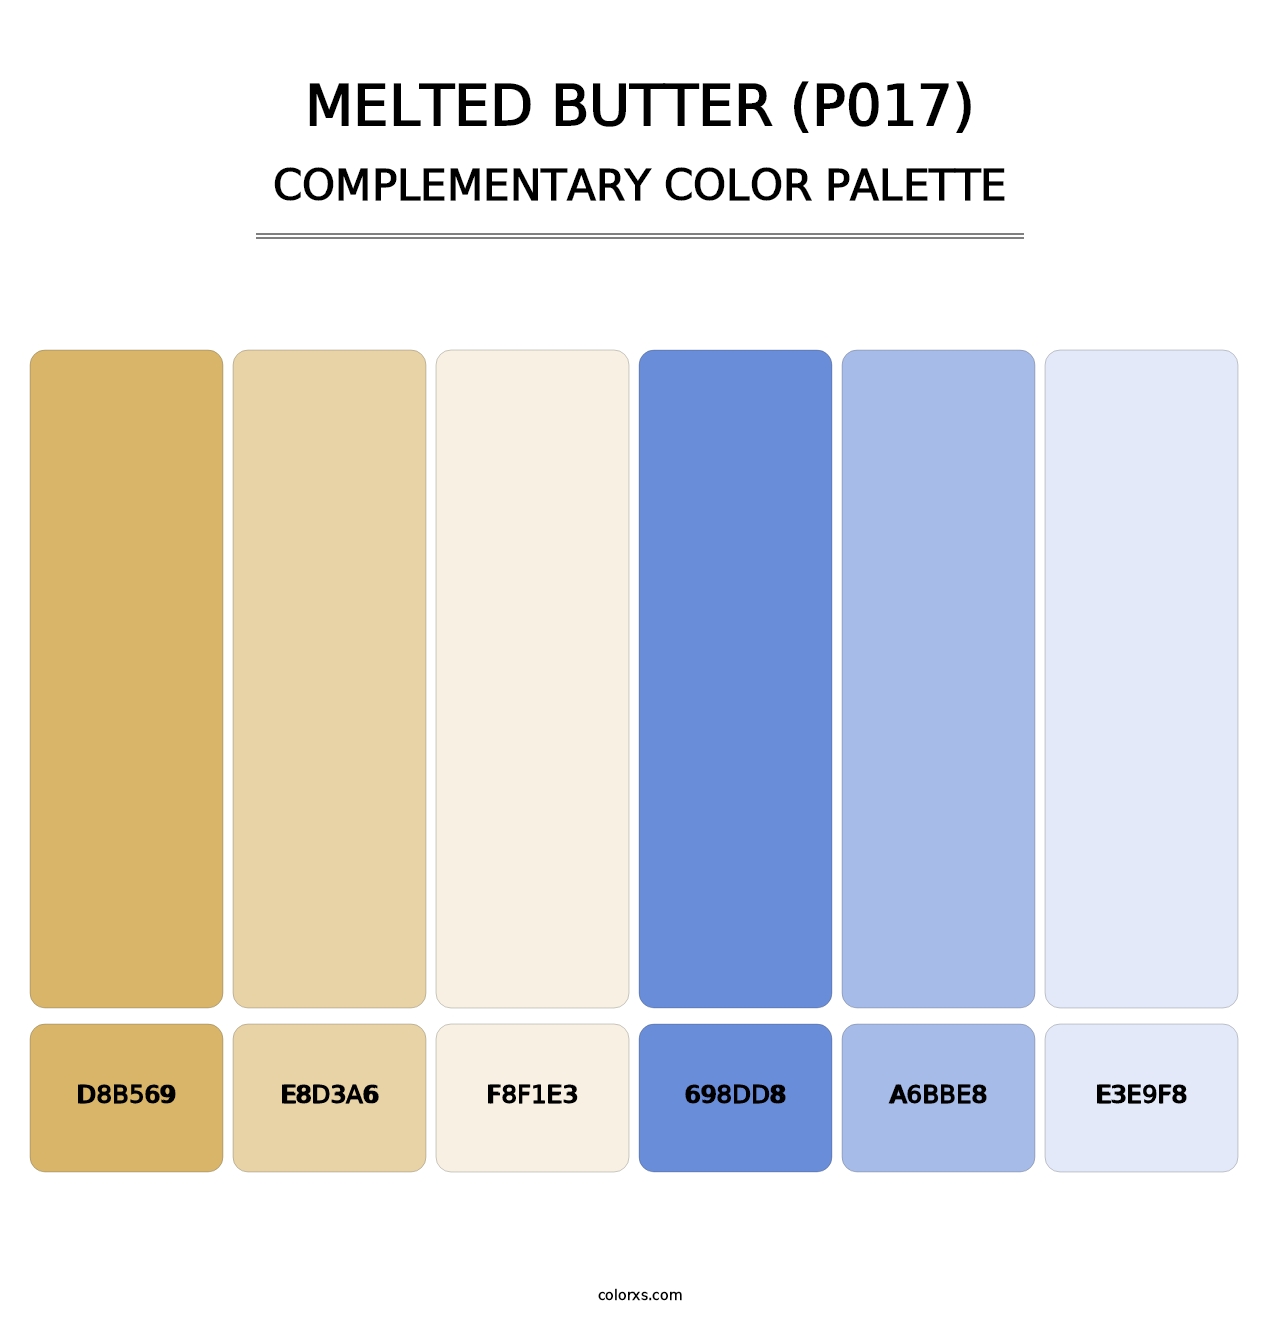 Melted Butter (P017) - Complementary Color Palette